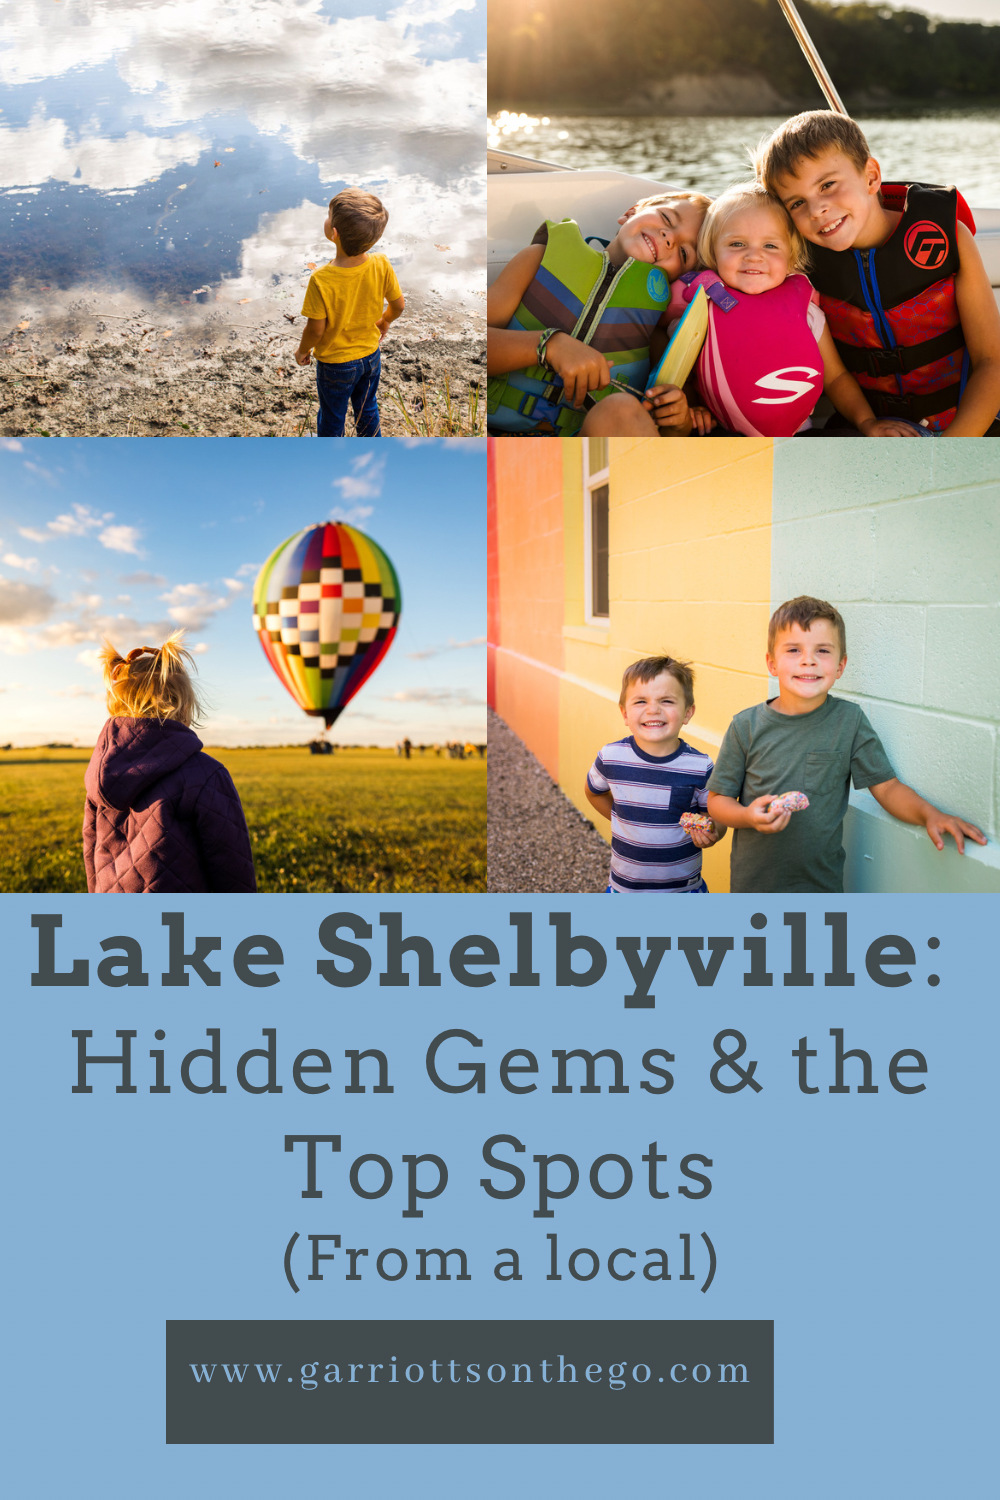 Lake Shelbyville: A Guide to Hidden Gems & the Top Spots